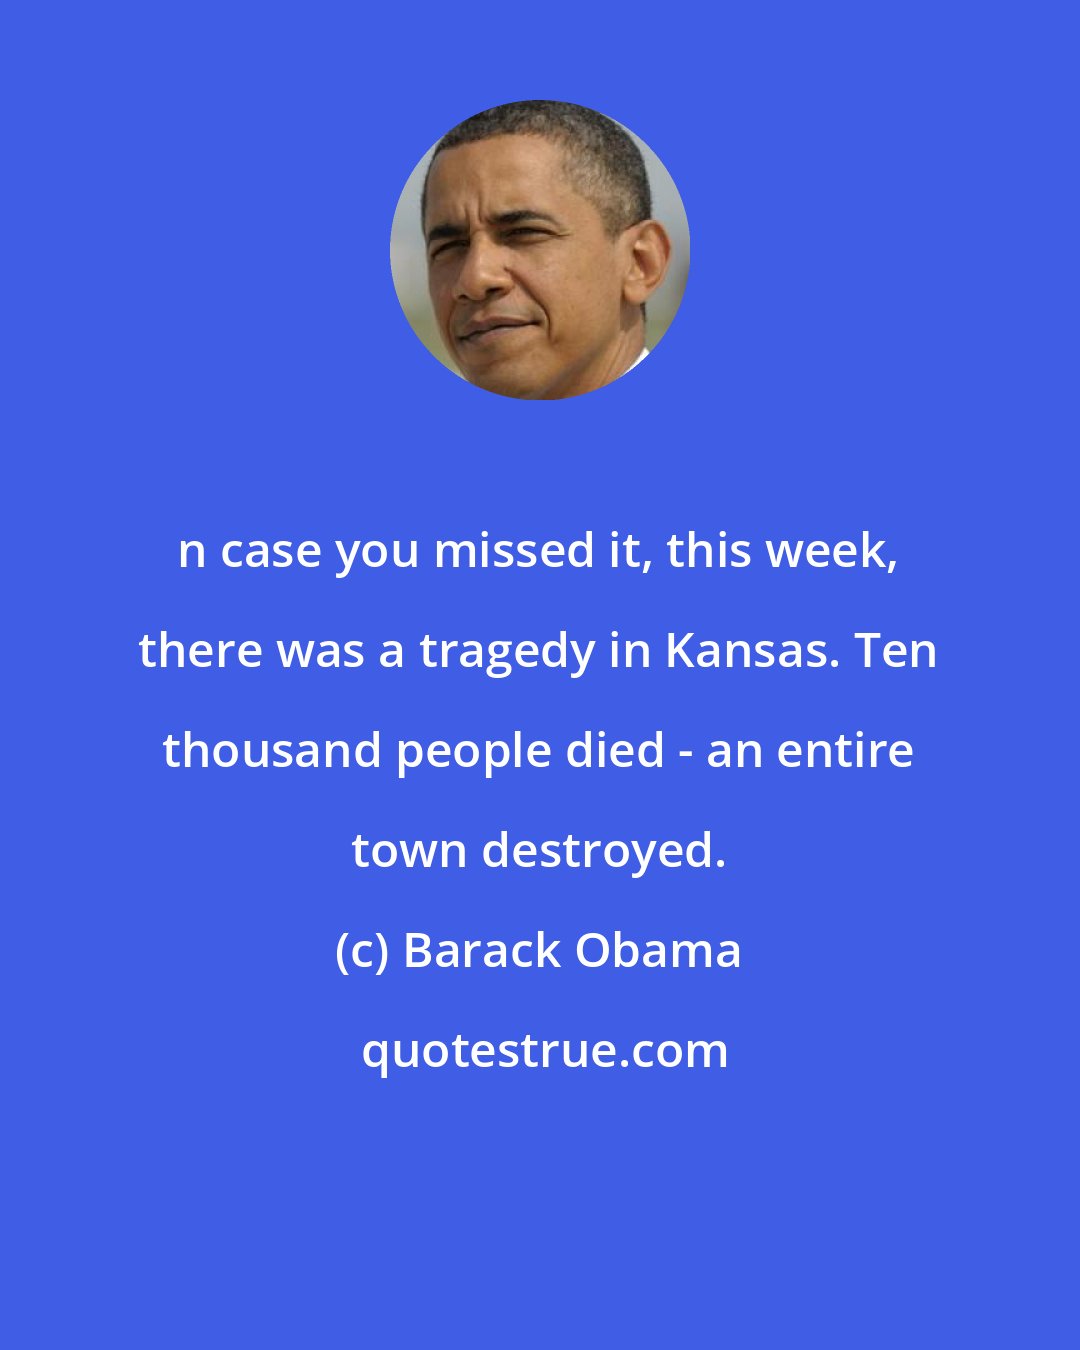 Barack Obama: n case you missed it, this week, there was a tragedy in Kansas. Ten thousand people died - an entire town destroyed.